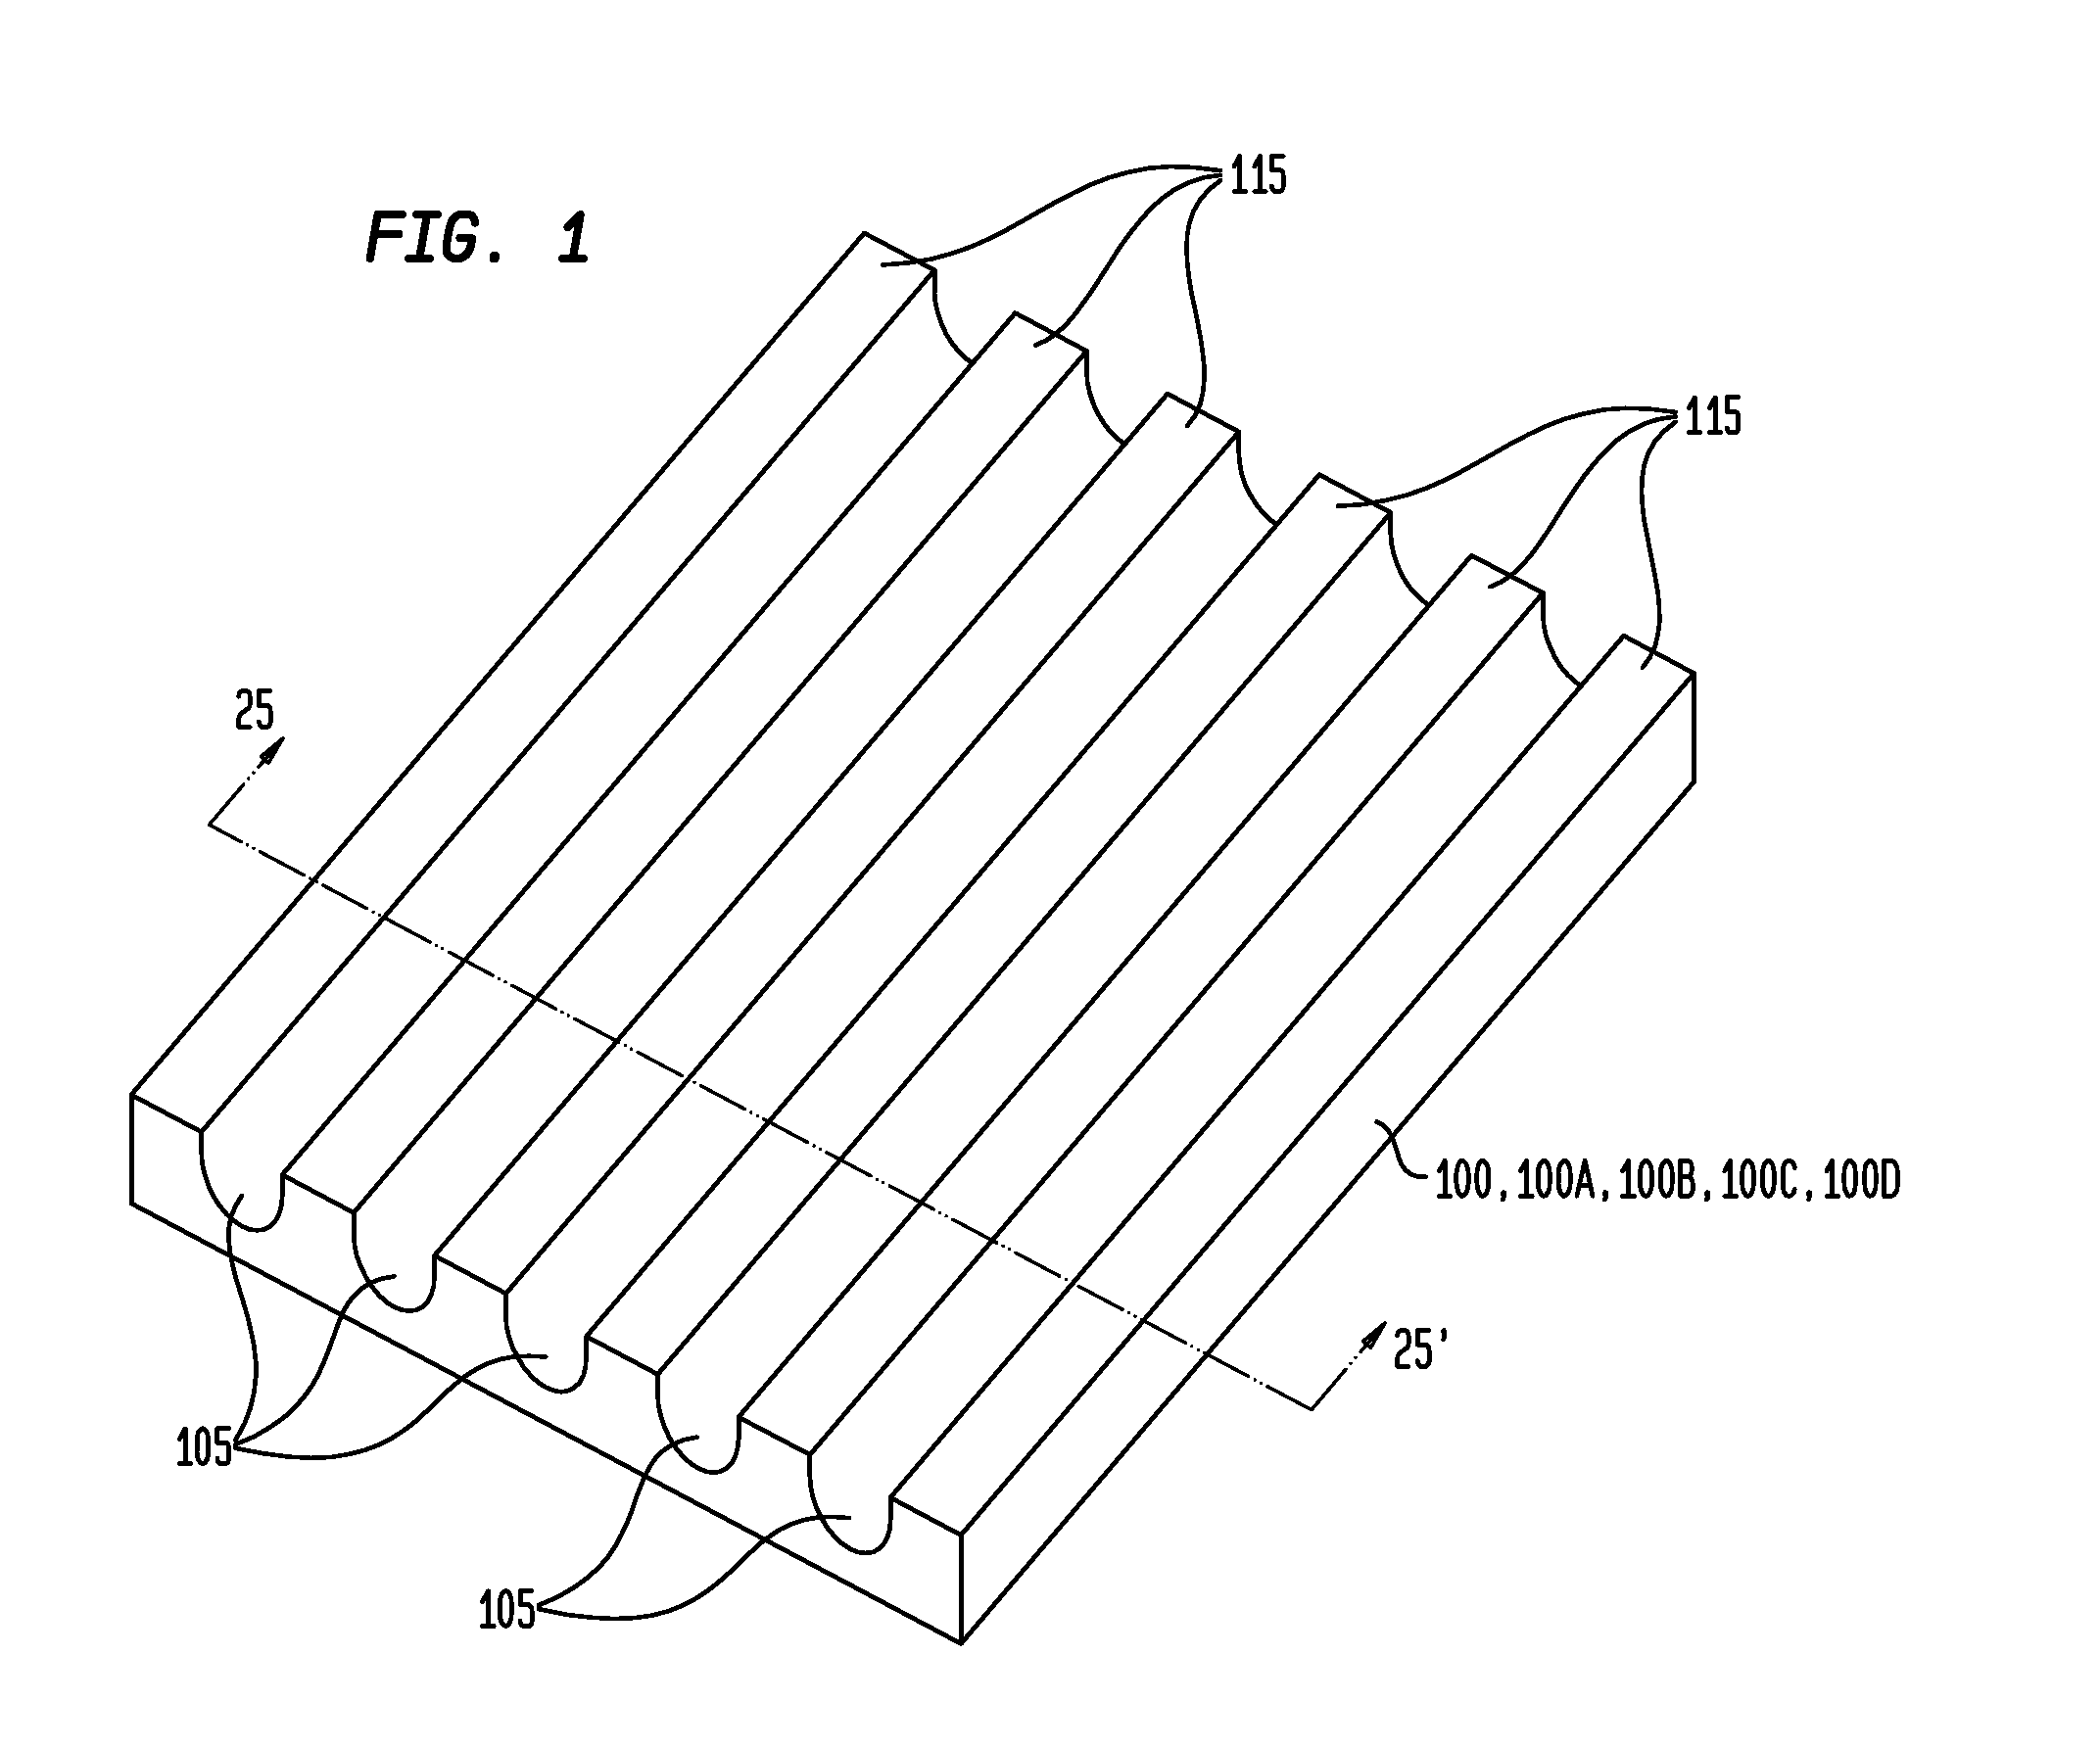 Method of Manufacturing a Light Emitting, Photovoltaic or Other Electronic Apparatus and System